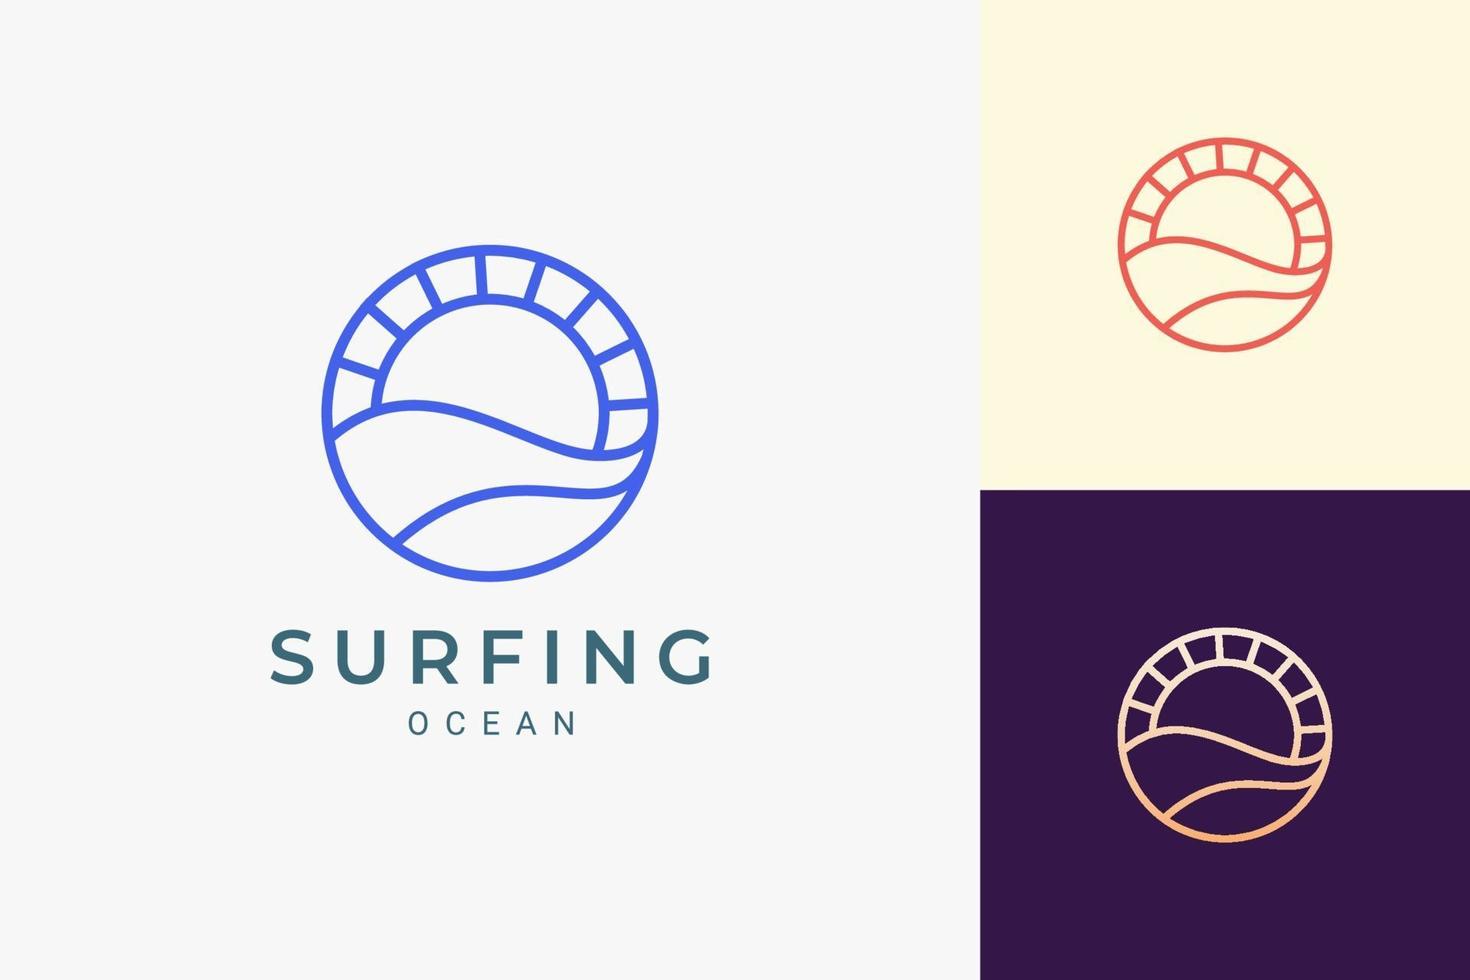 Ocean or water theme logo with waves and sun in circle vector